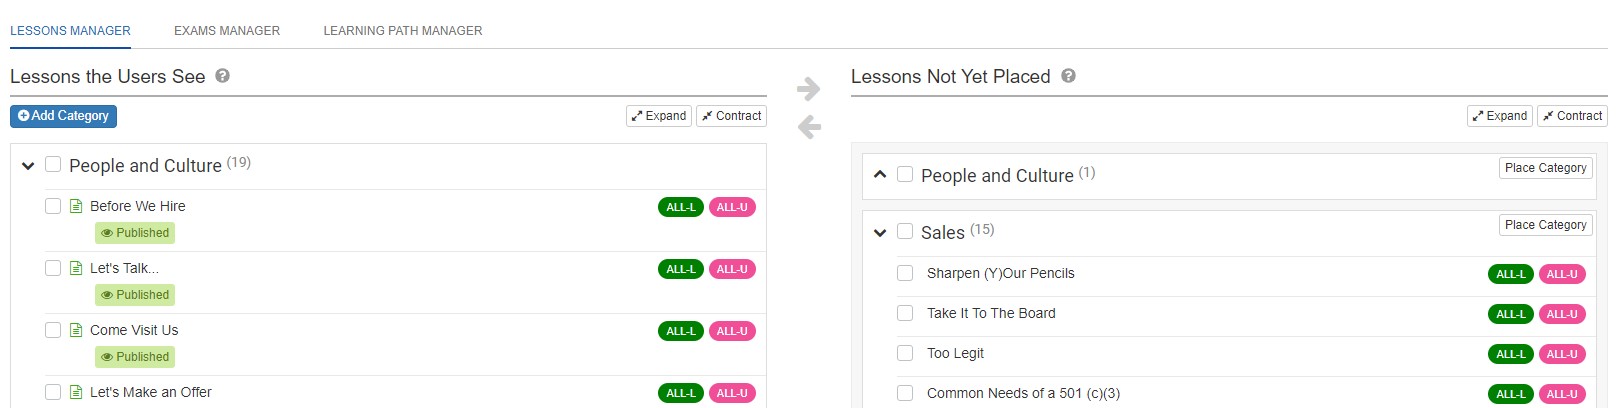 A screenshot of the Learning Experience area of an admin account with several lessons placed for users to view and other lessons yet to be placed.